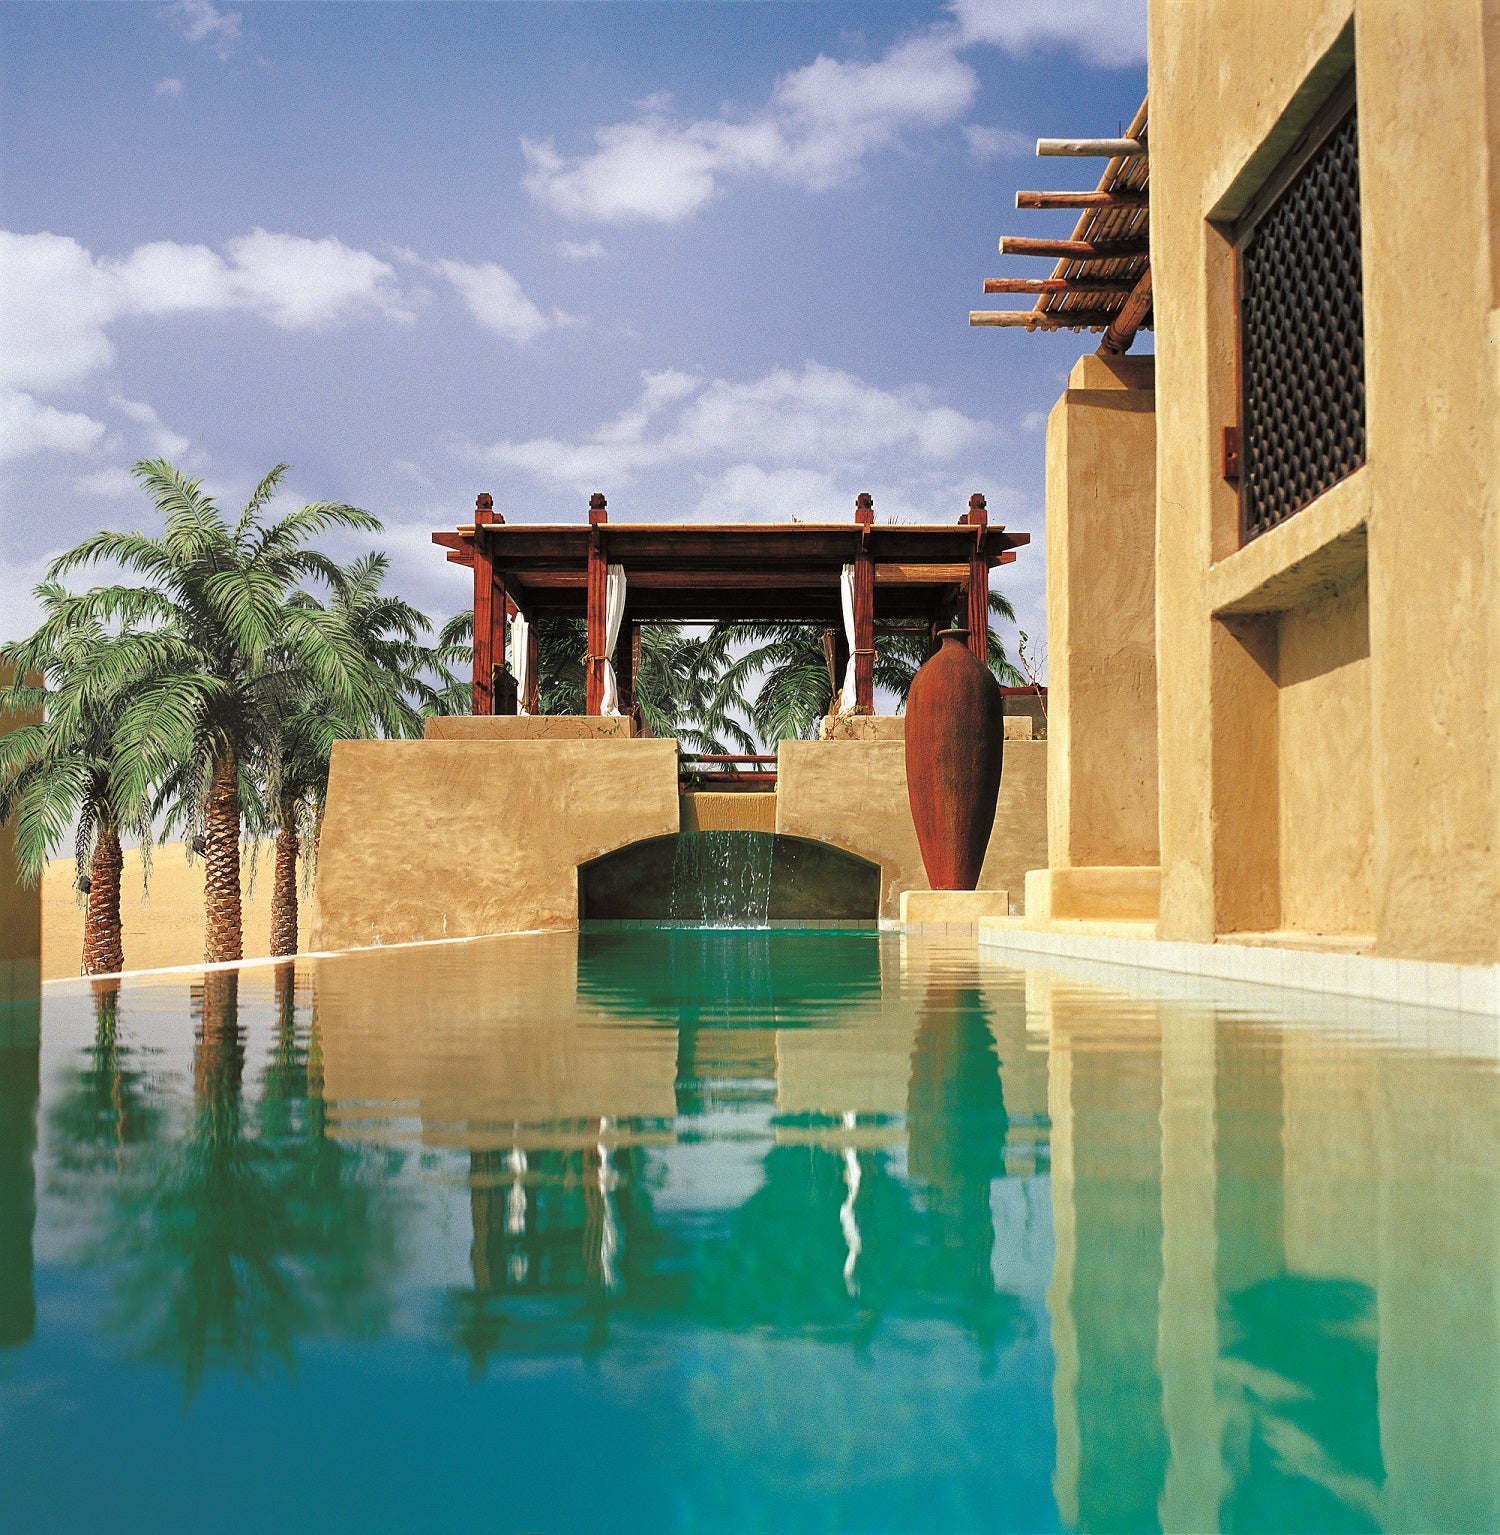 Cool off from the desert heat in the Bab Al Shams infinity pool